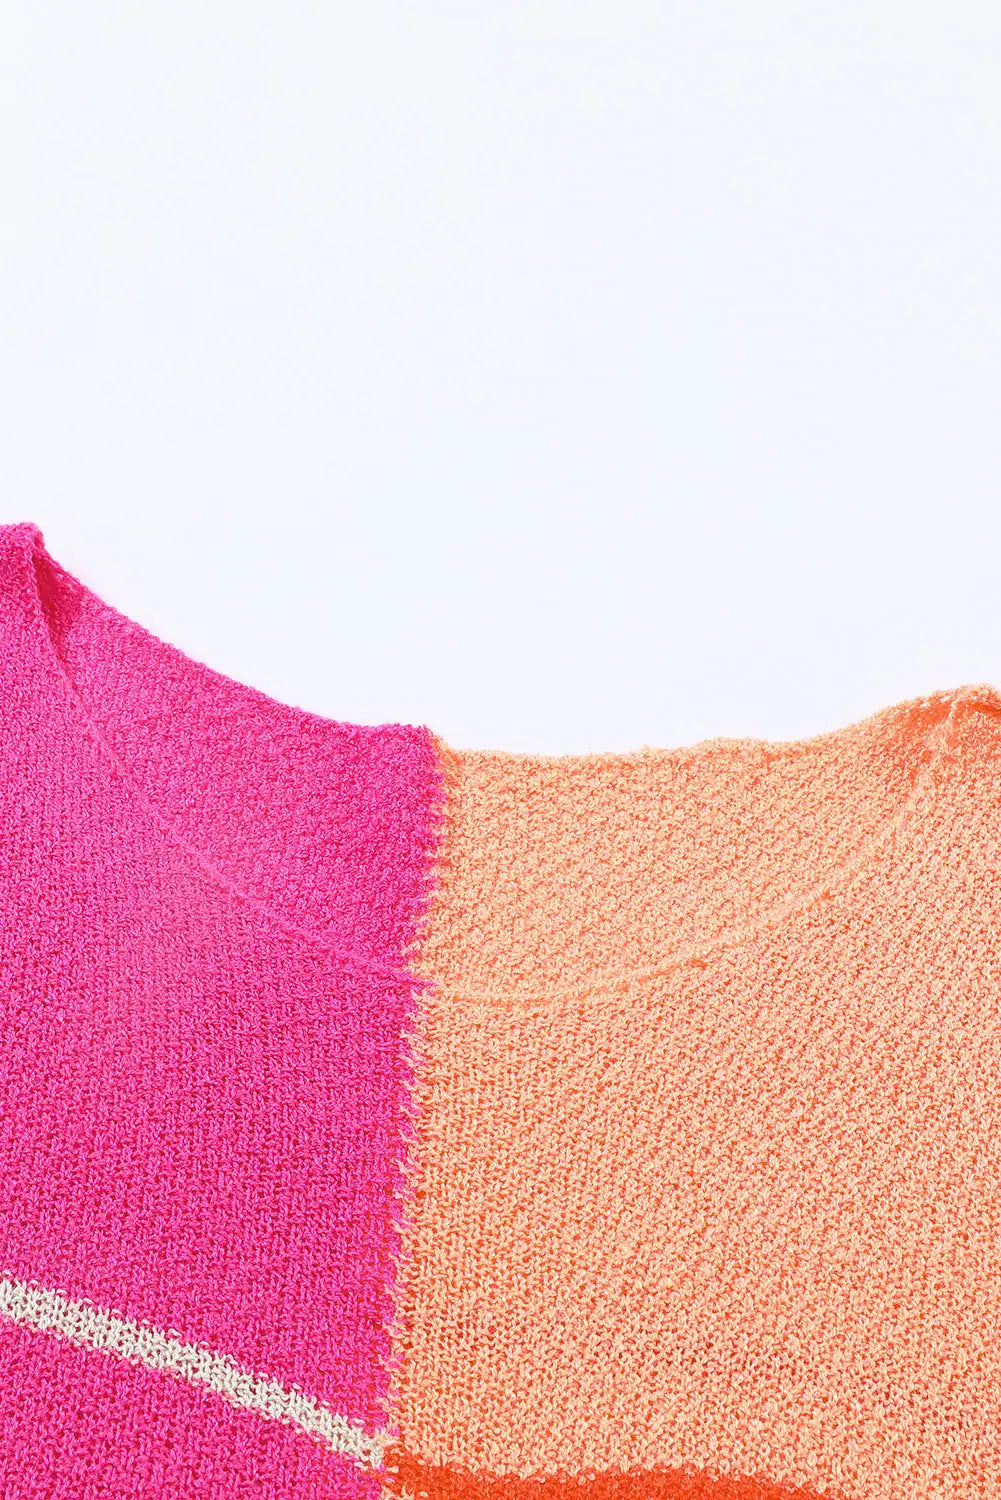 Multicolour striped color block loose fit knit sweater - tops